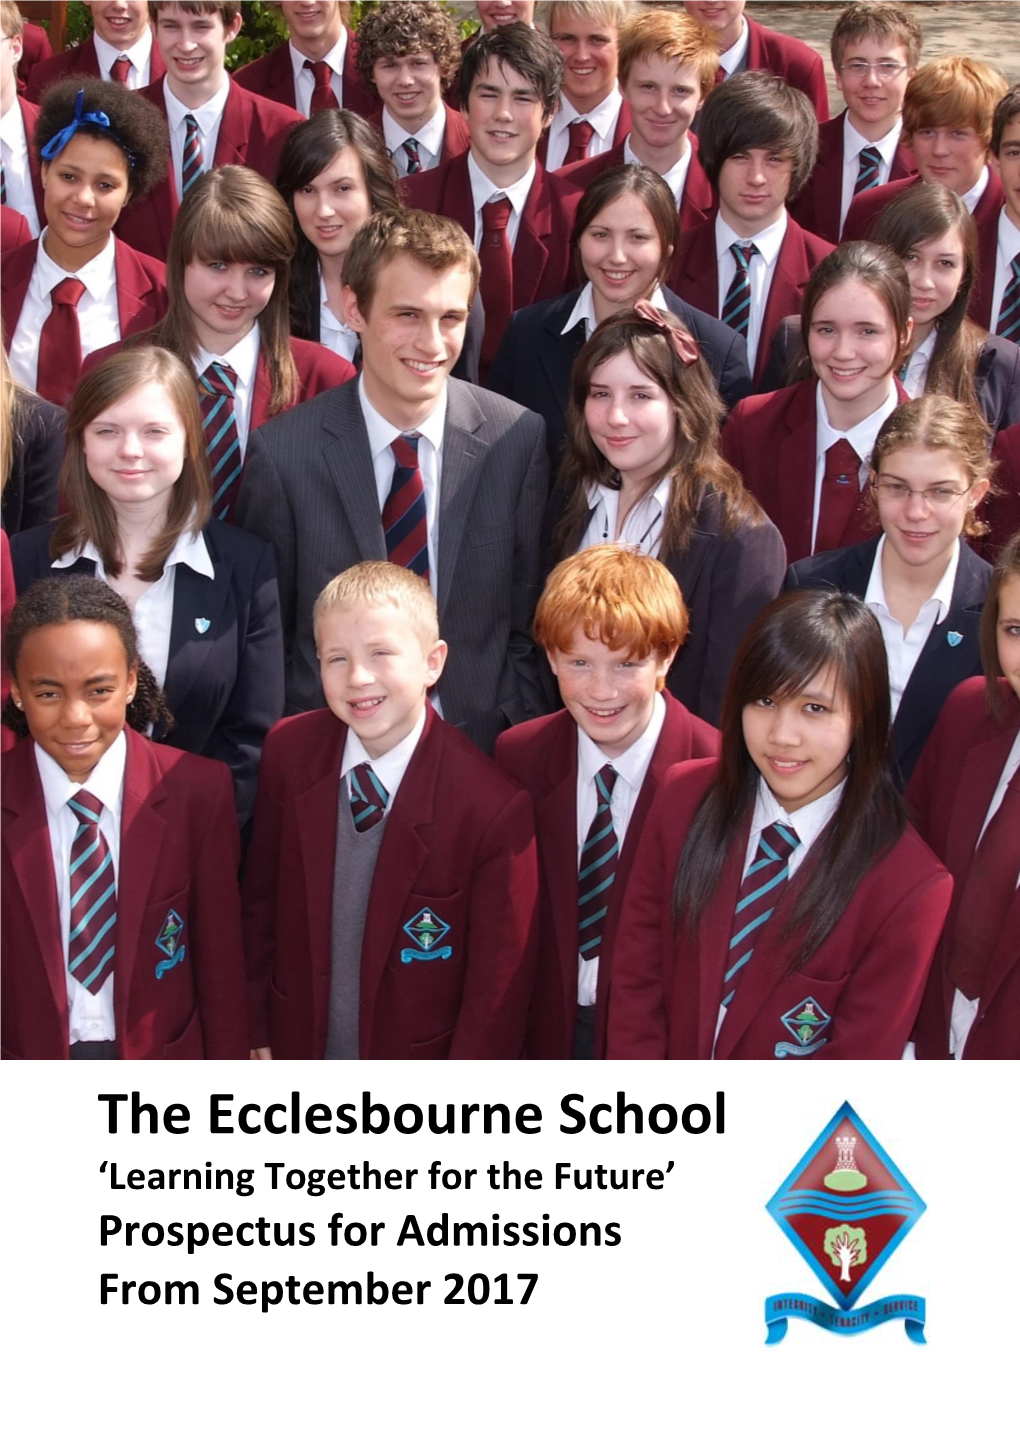 The Ecclesbourne School ‘Learning Together for the Future’